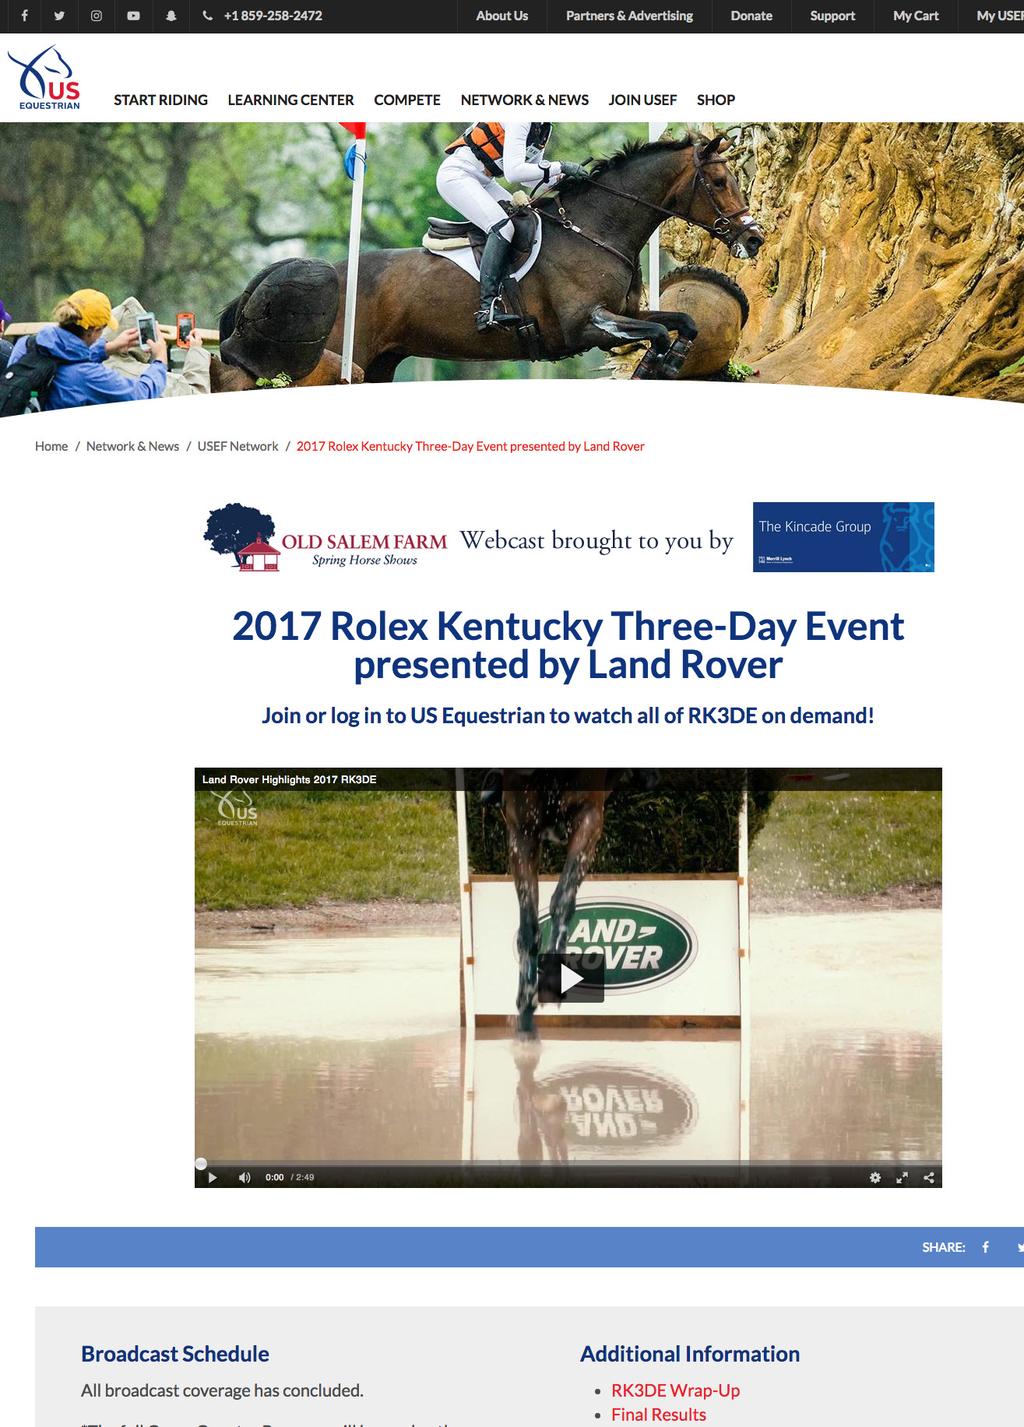 USEF NETWORK USEF Network features live streaming and on-demand video from a wide range of exciting equestrian events each year.